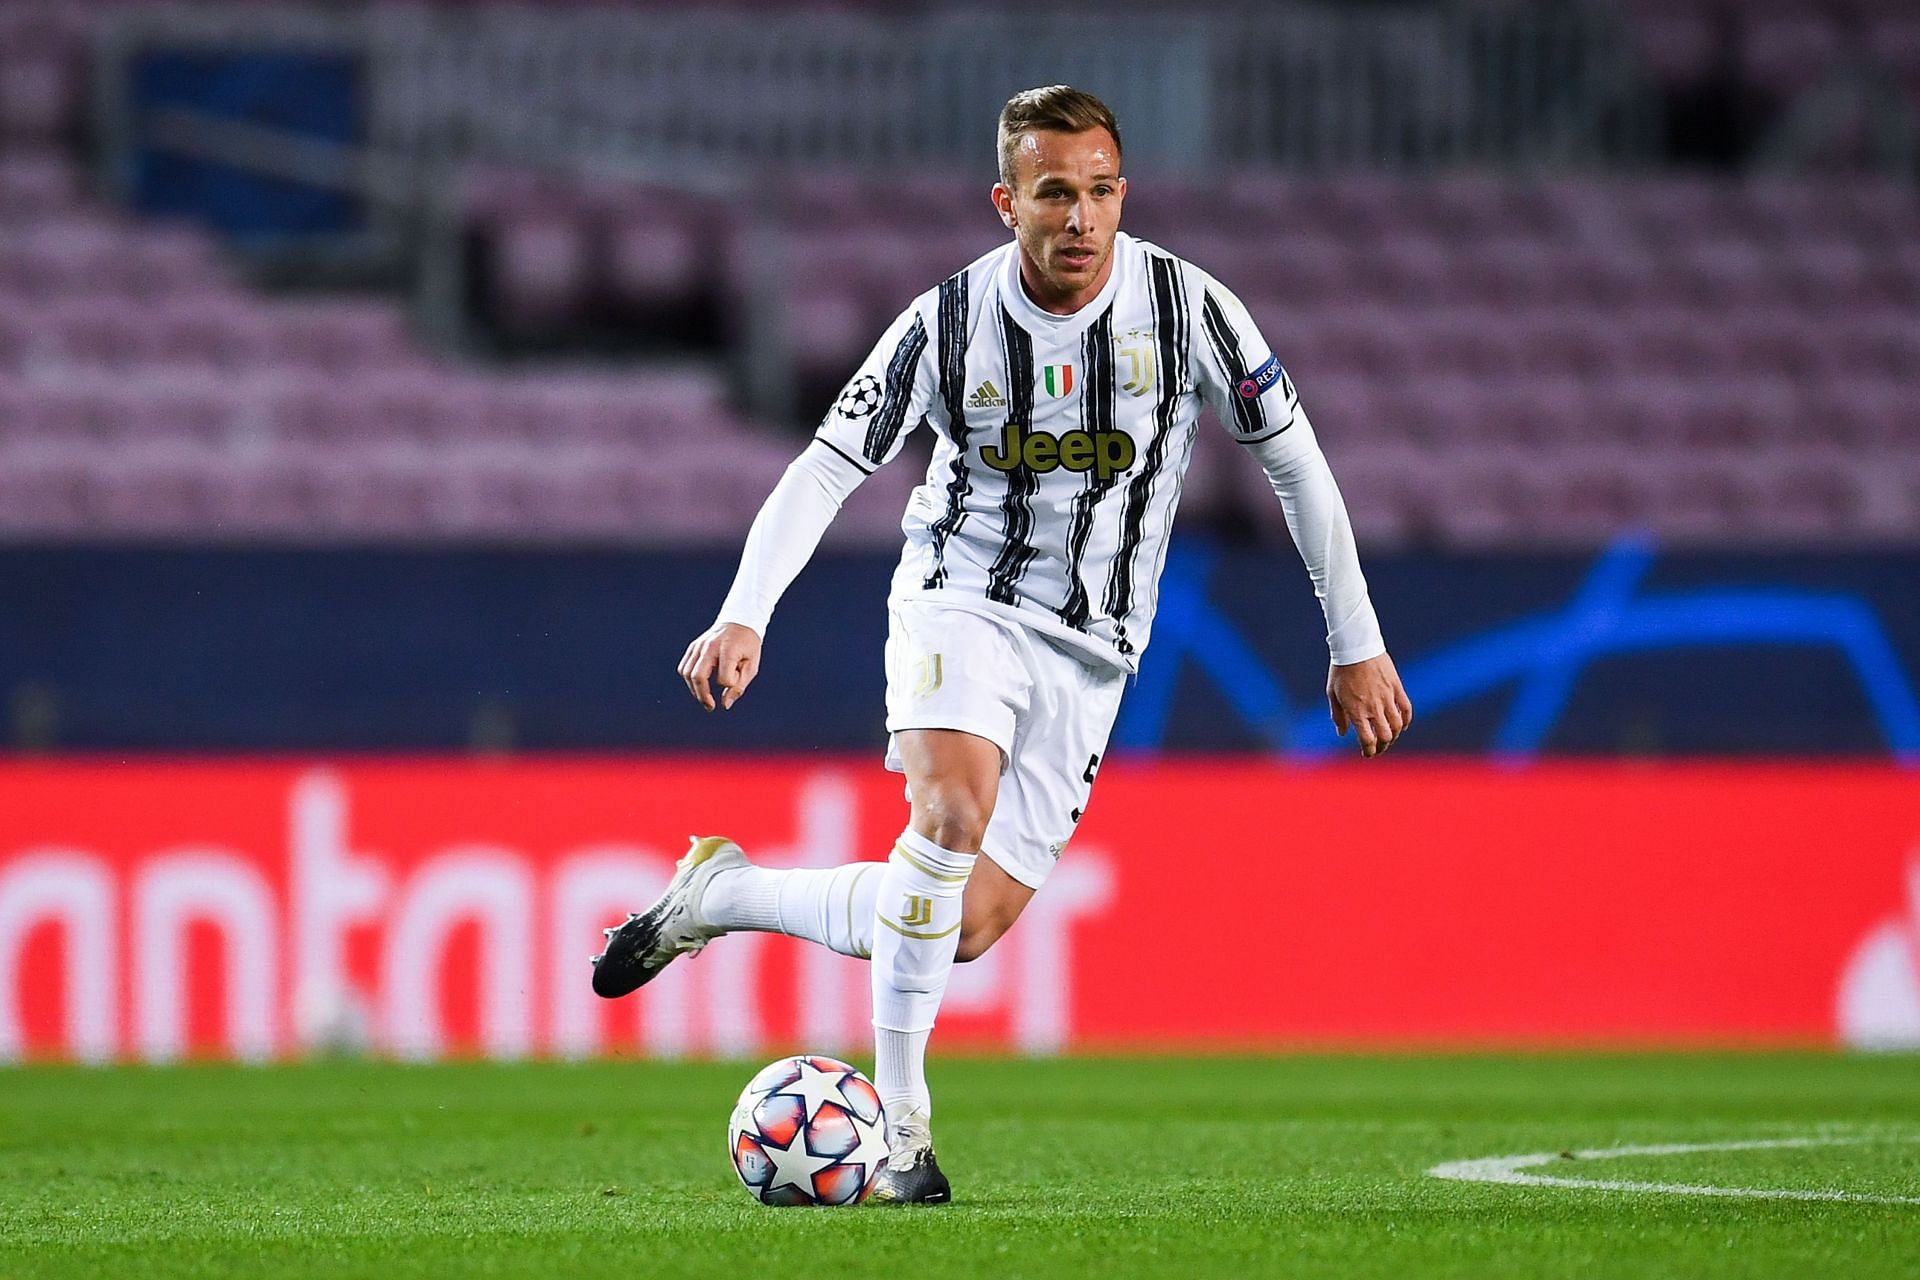 Arthur has headed back to Juventus following his unsuccessful loan spell.